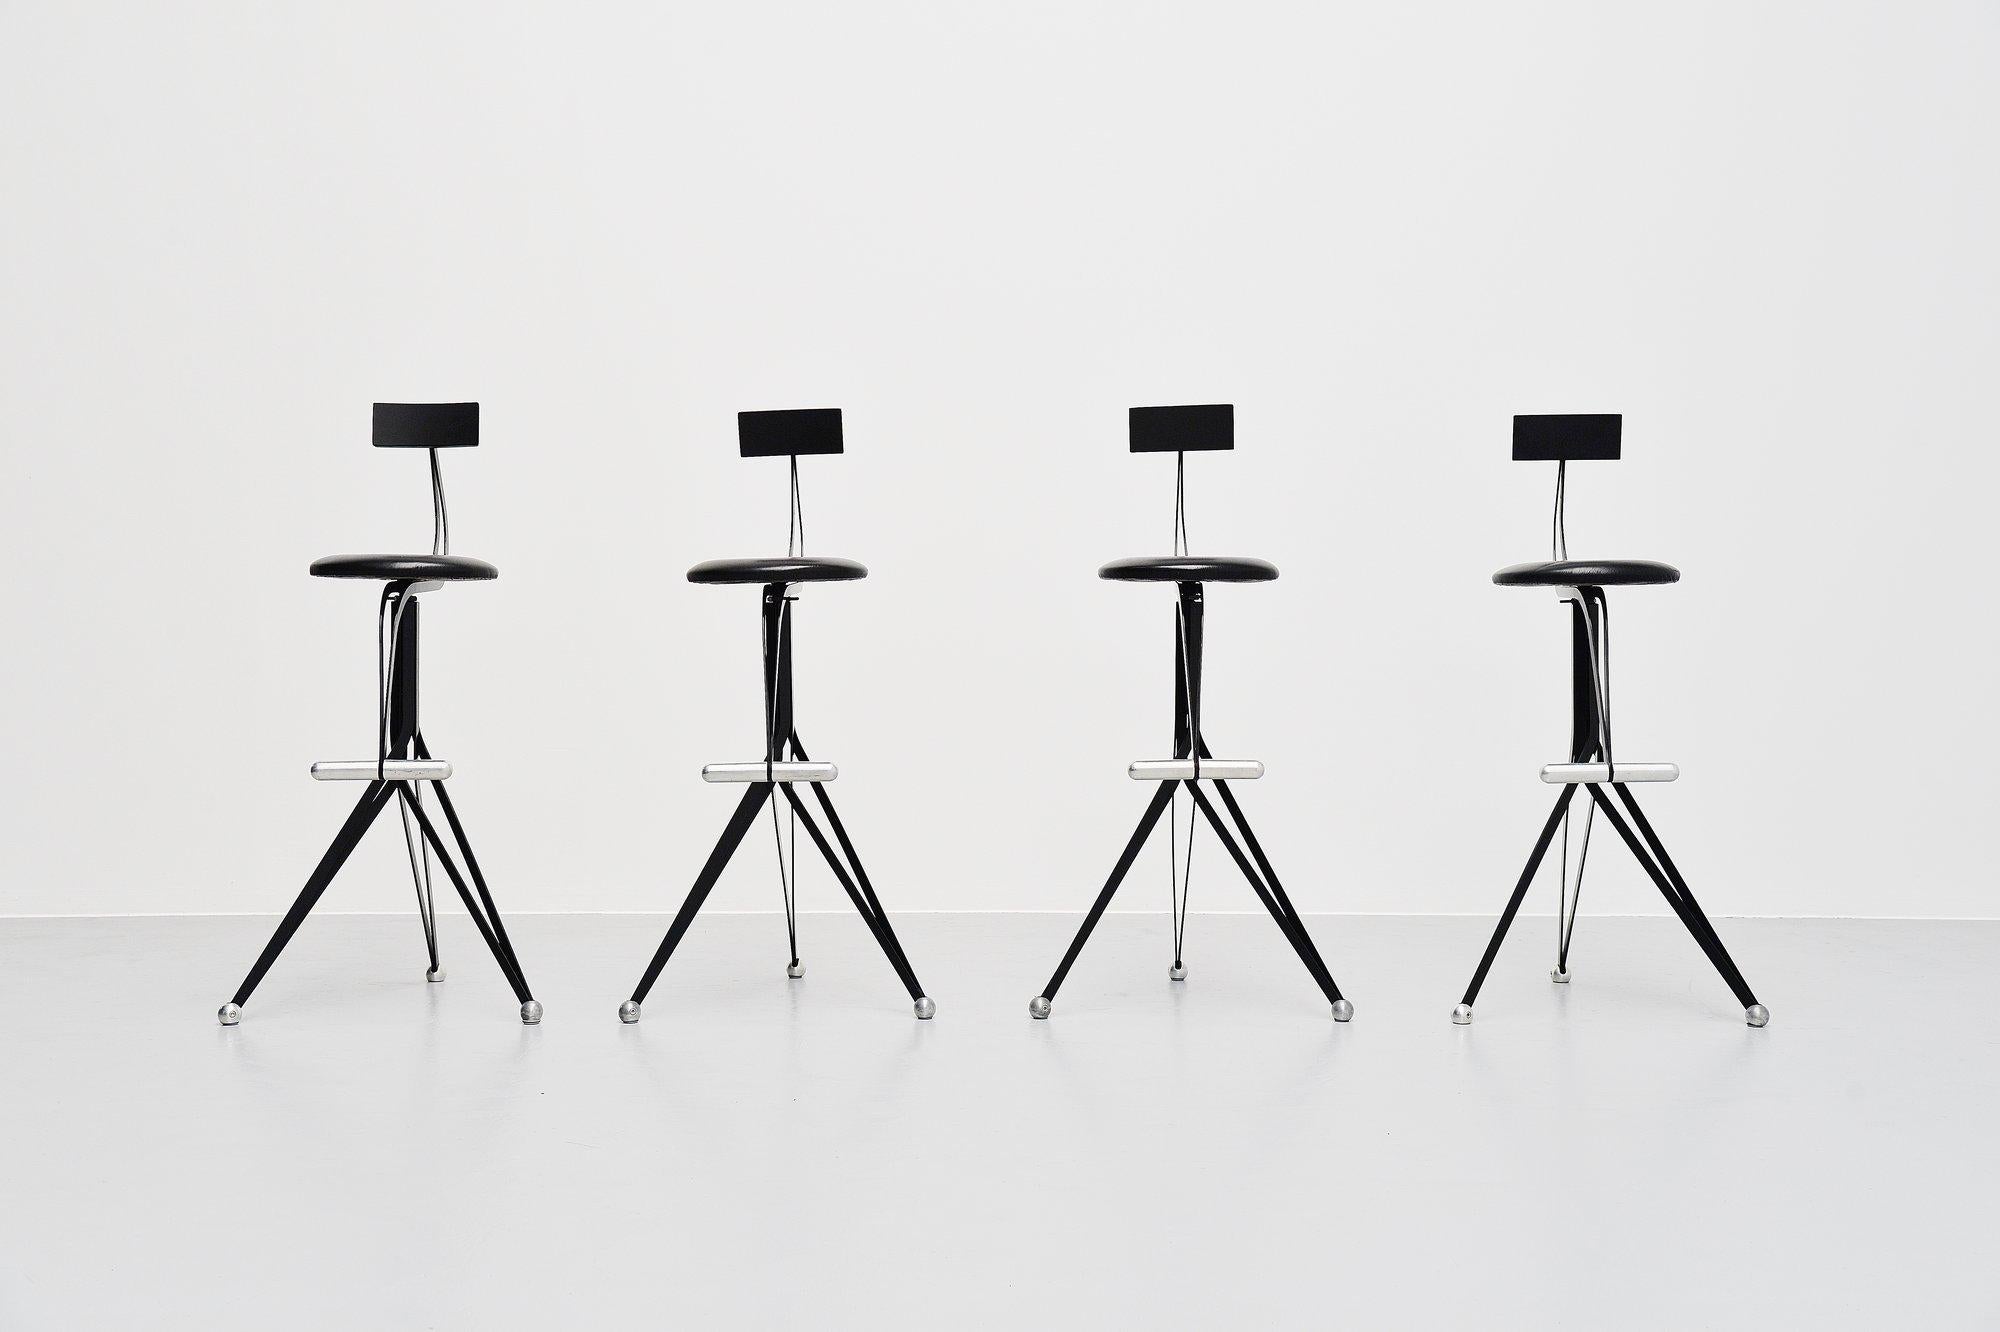 Super rare set of 4 bar stools with back rests designed by the world famous UK designer Ron Arad and manufactured by Zeus, Italy 1994. These stools are from the Anonimus series by Arad and are no longer in production. The stools have a black